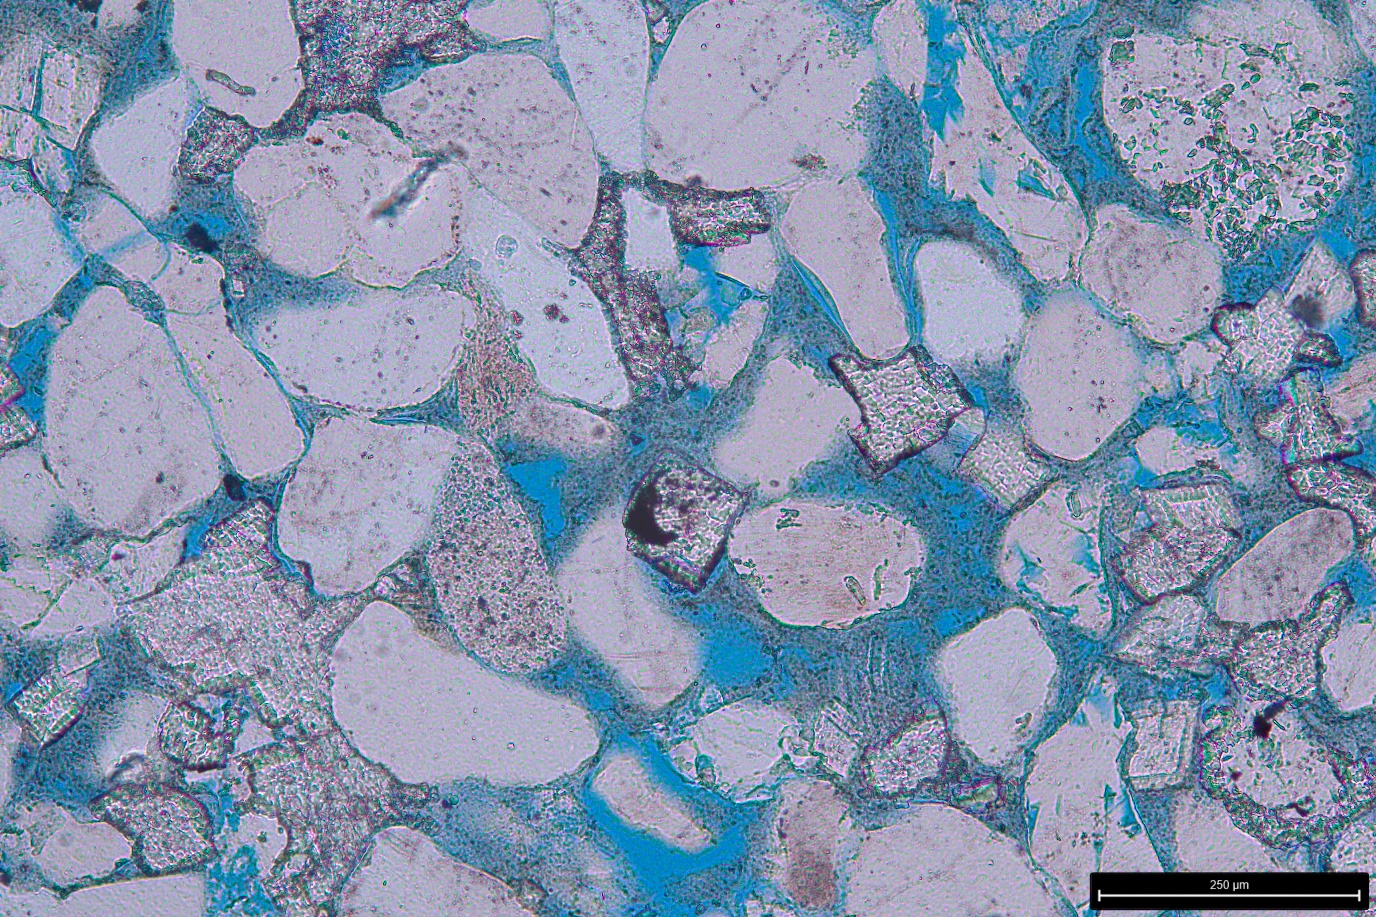 Microscopic image of mudstone. Blue shows the spaces wtihin which hydrigen is stored